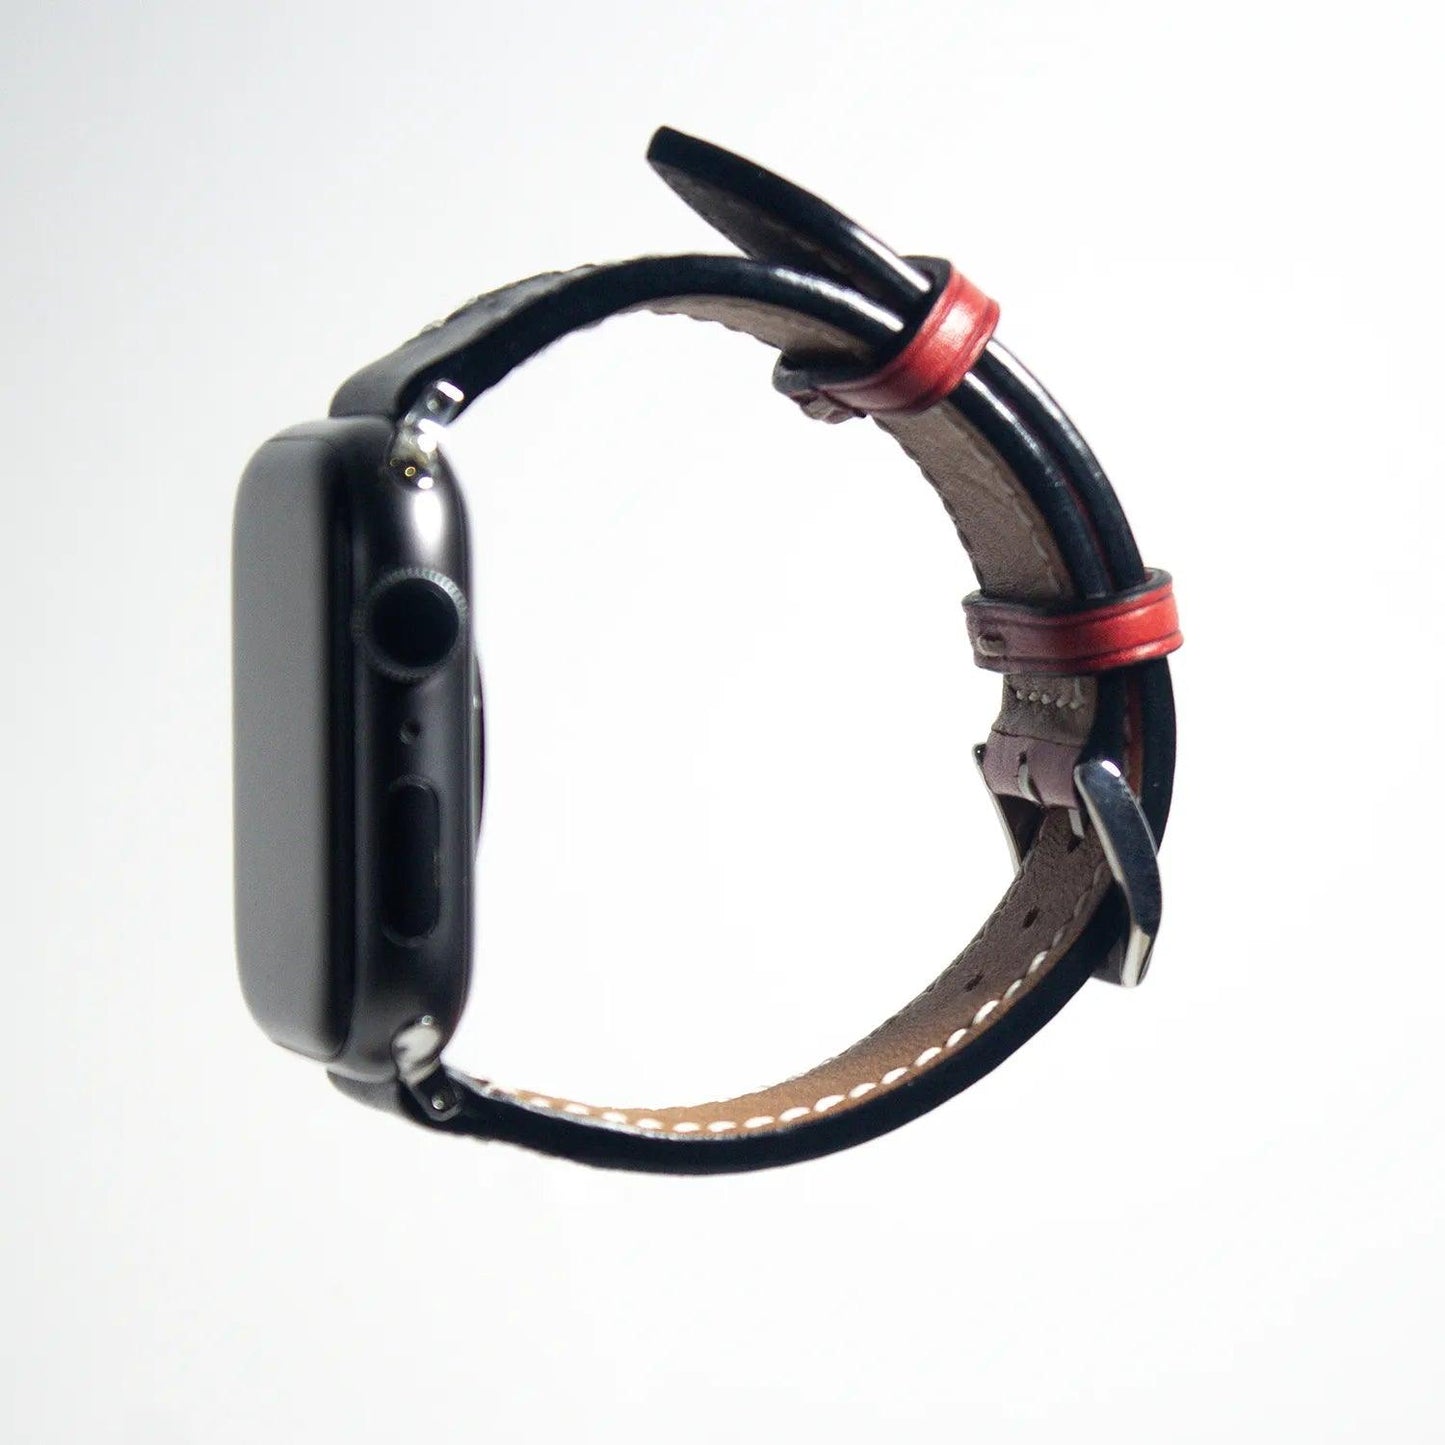 Elegant apple watch leather band in Veg leather, with a seamless gradient from red to black for a bold look.